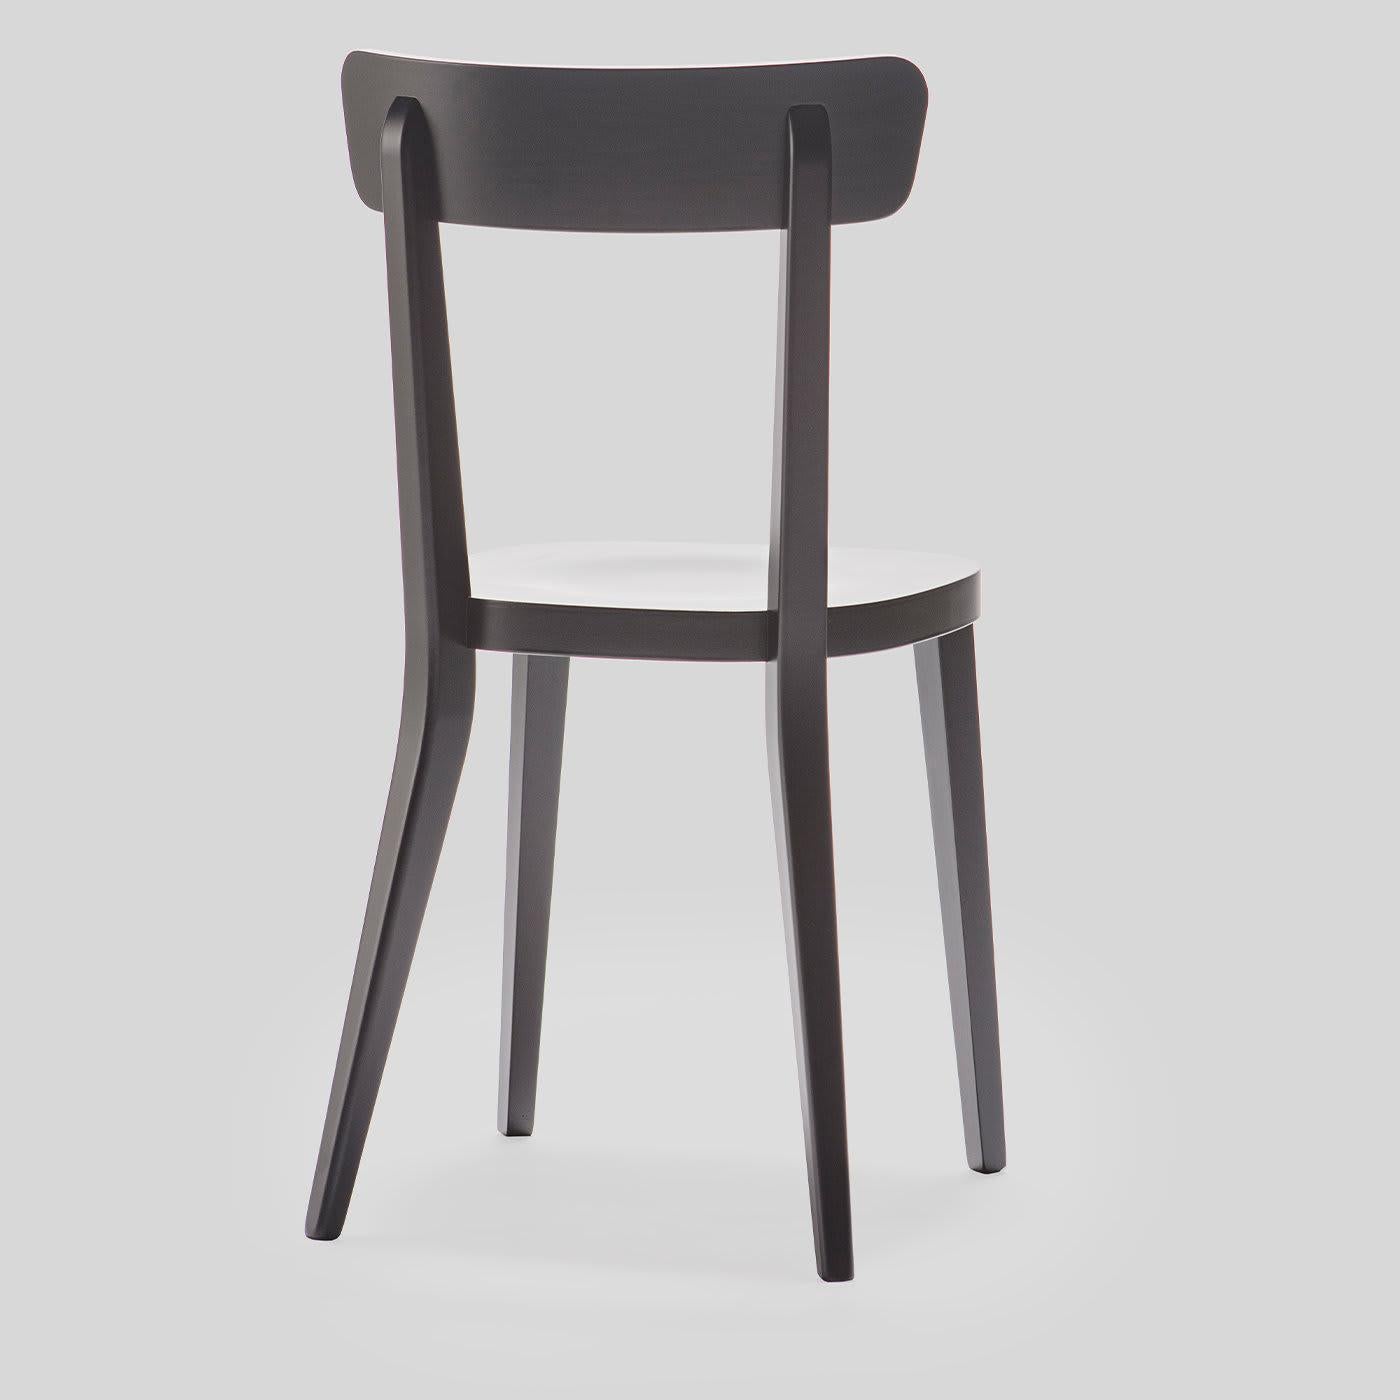 Restyled from the original 1960 Milano Collection, this new version boasts a gently curved backrest and back legs, all in solid beechwood finished in a dramatic black color. This versatile chair is suitable for a variety of residential and